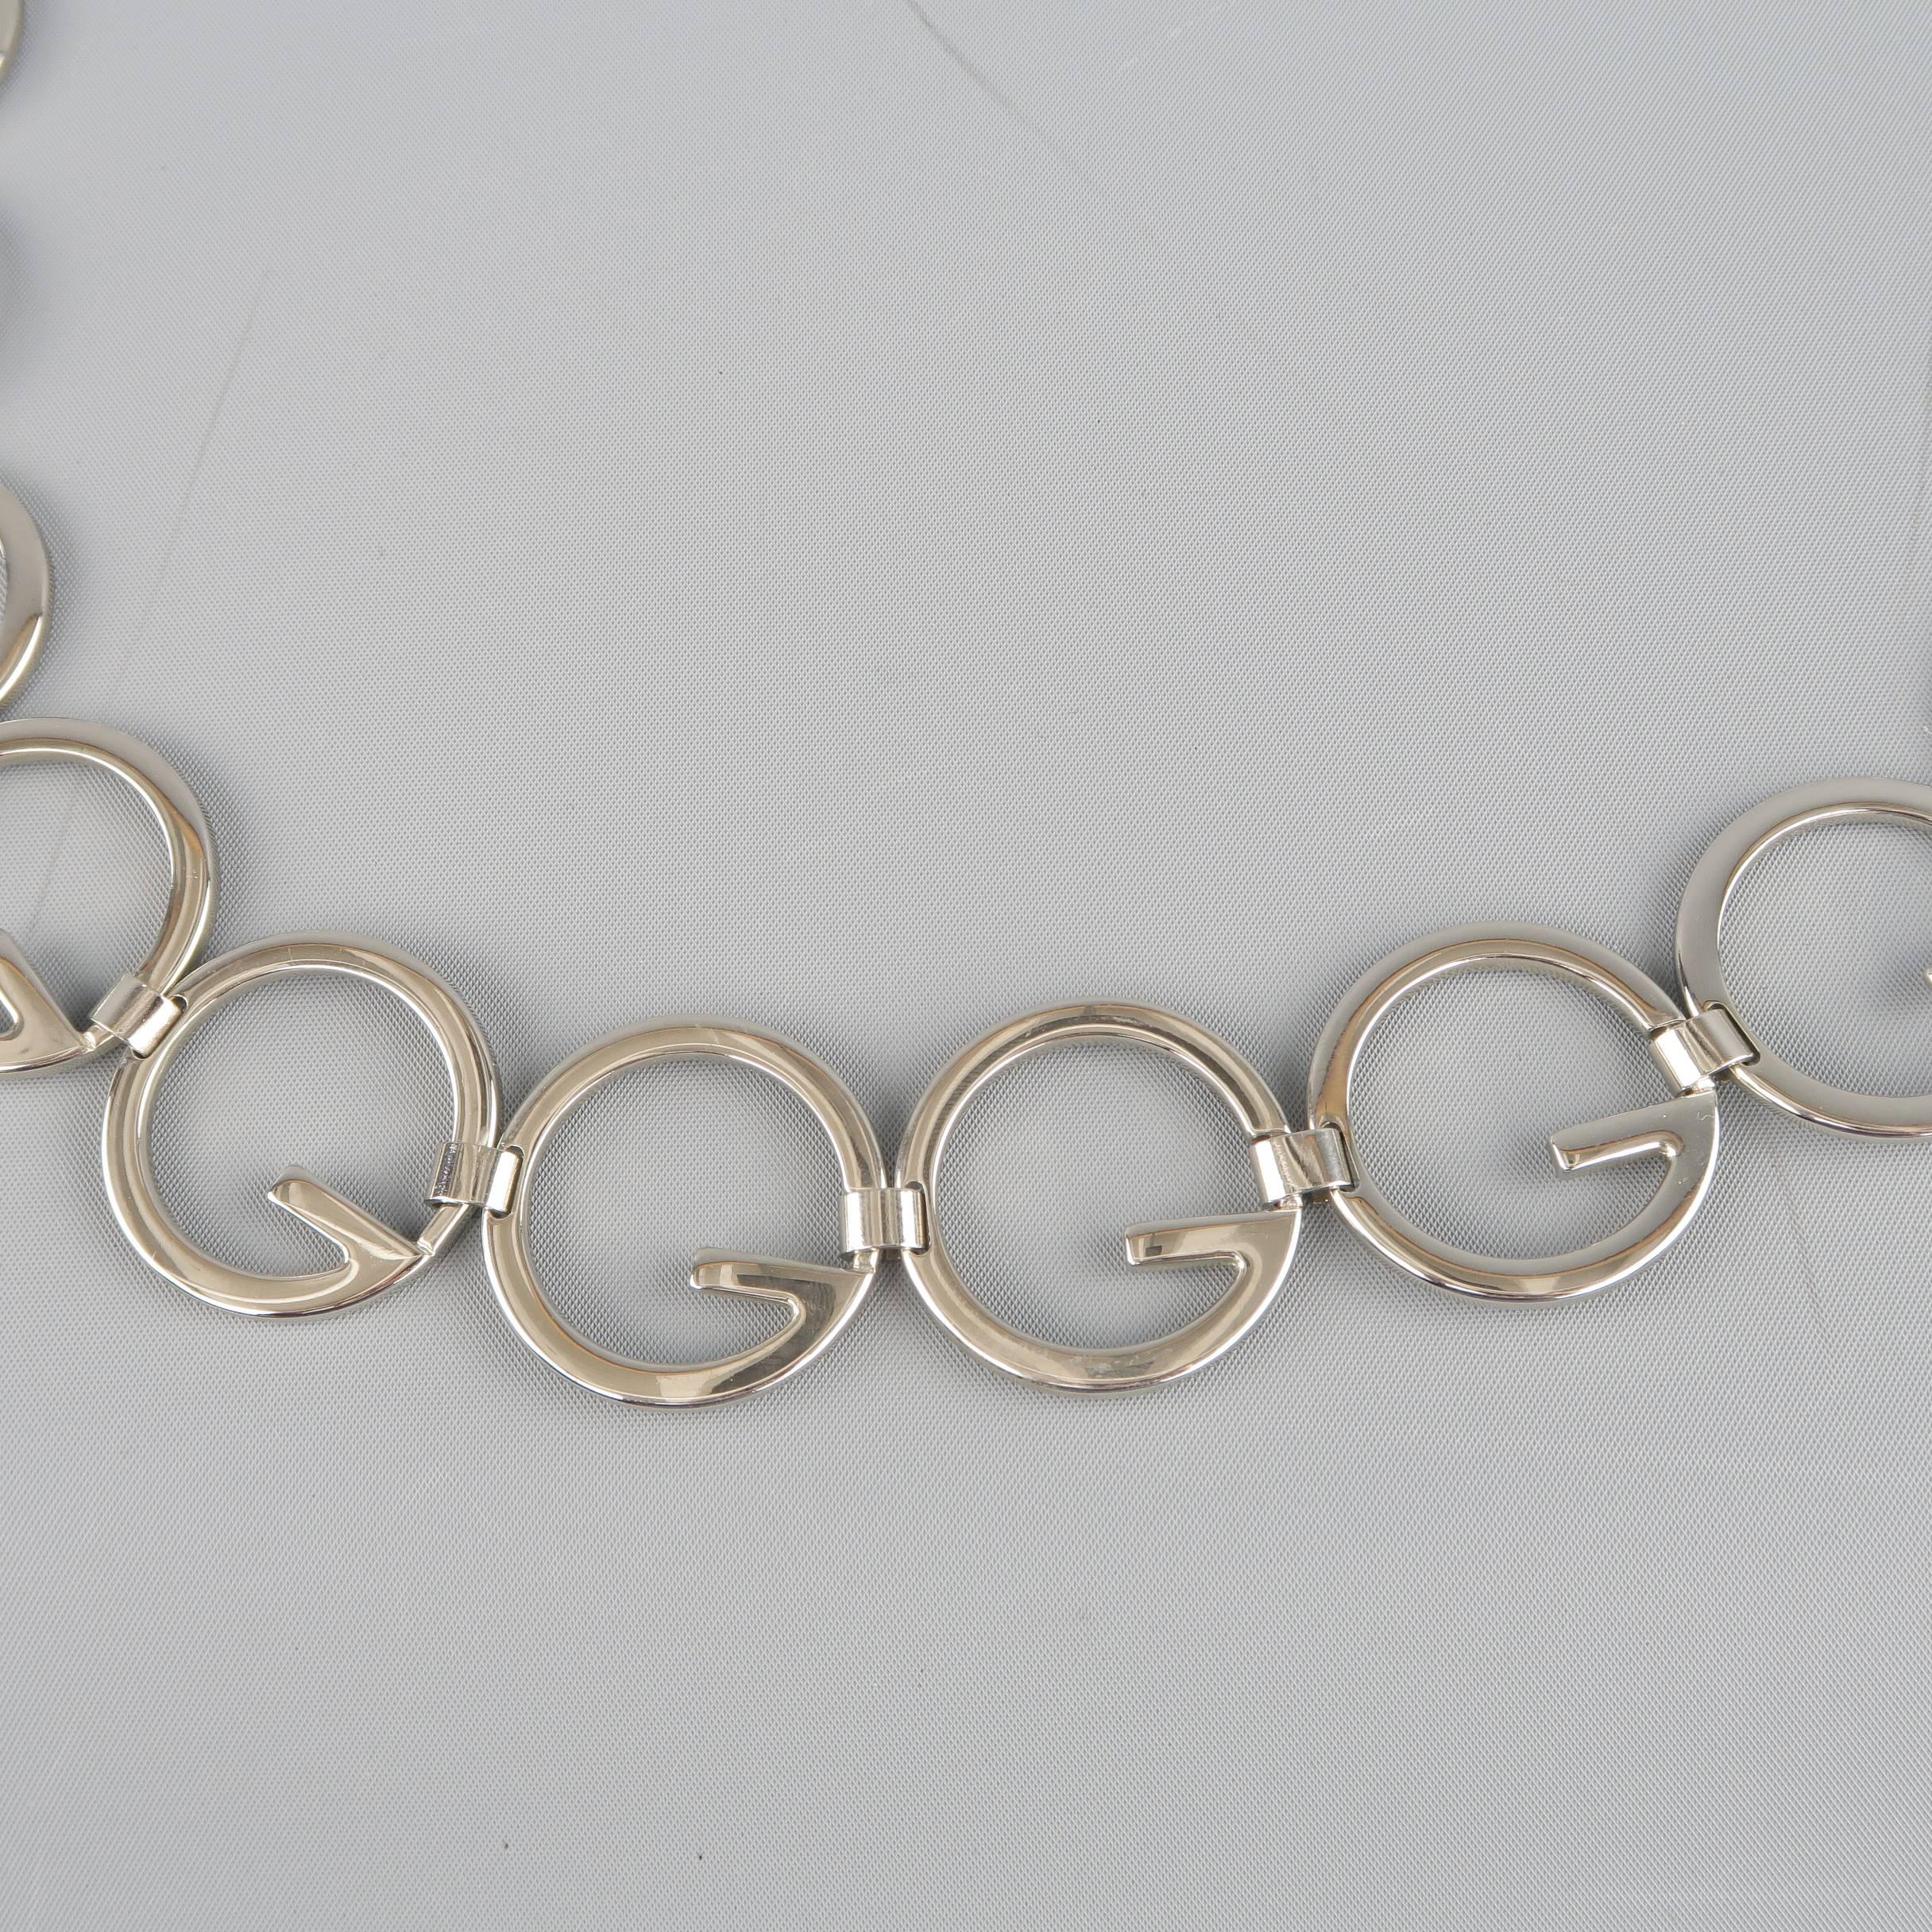 Vintage GUCCI chain belt  comes in silver tone polished metal and features Round G loops and chain clasp closure. Made in Italy.
 
Good Pre-Owned Condition.
Marked: (no size)
 
Length: 34.5 in.
Width: 1.45 in.
Fits: 30-34 in.
SKU: 87220 
Category: